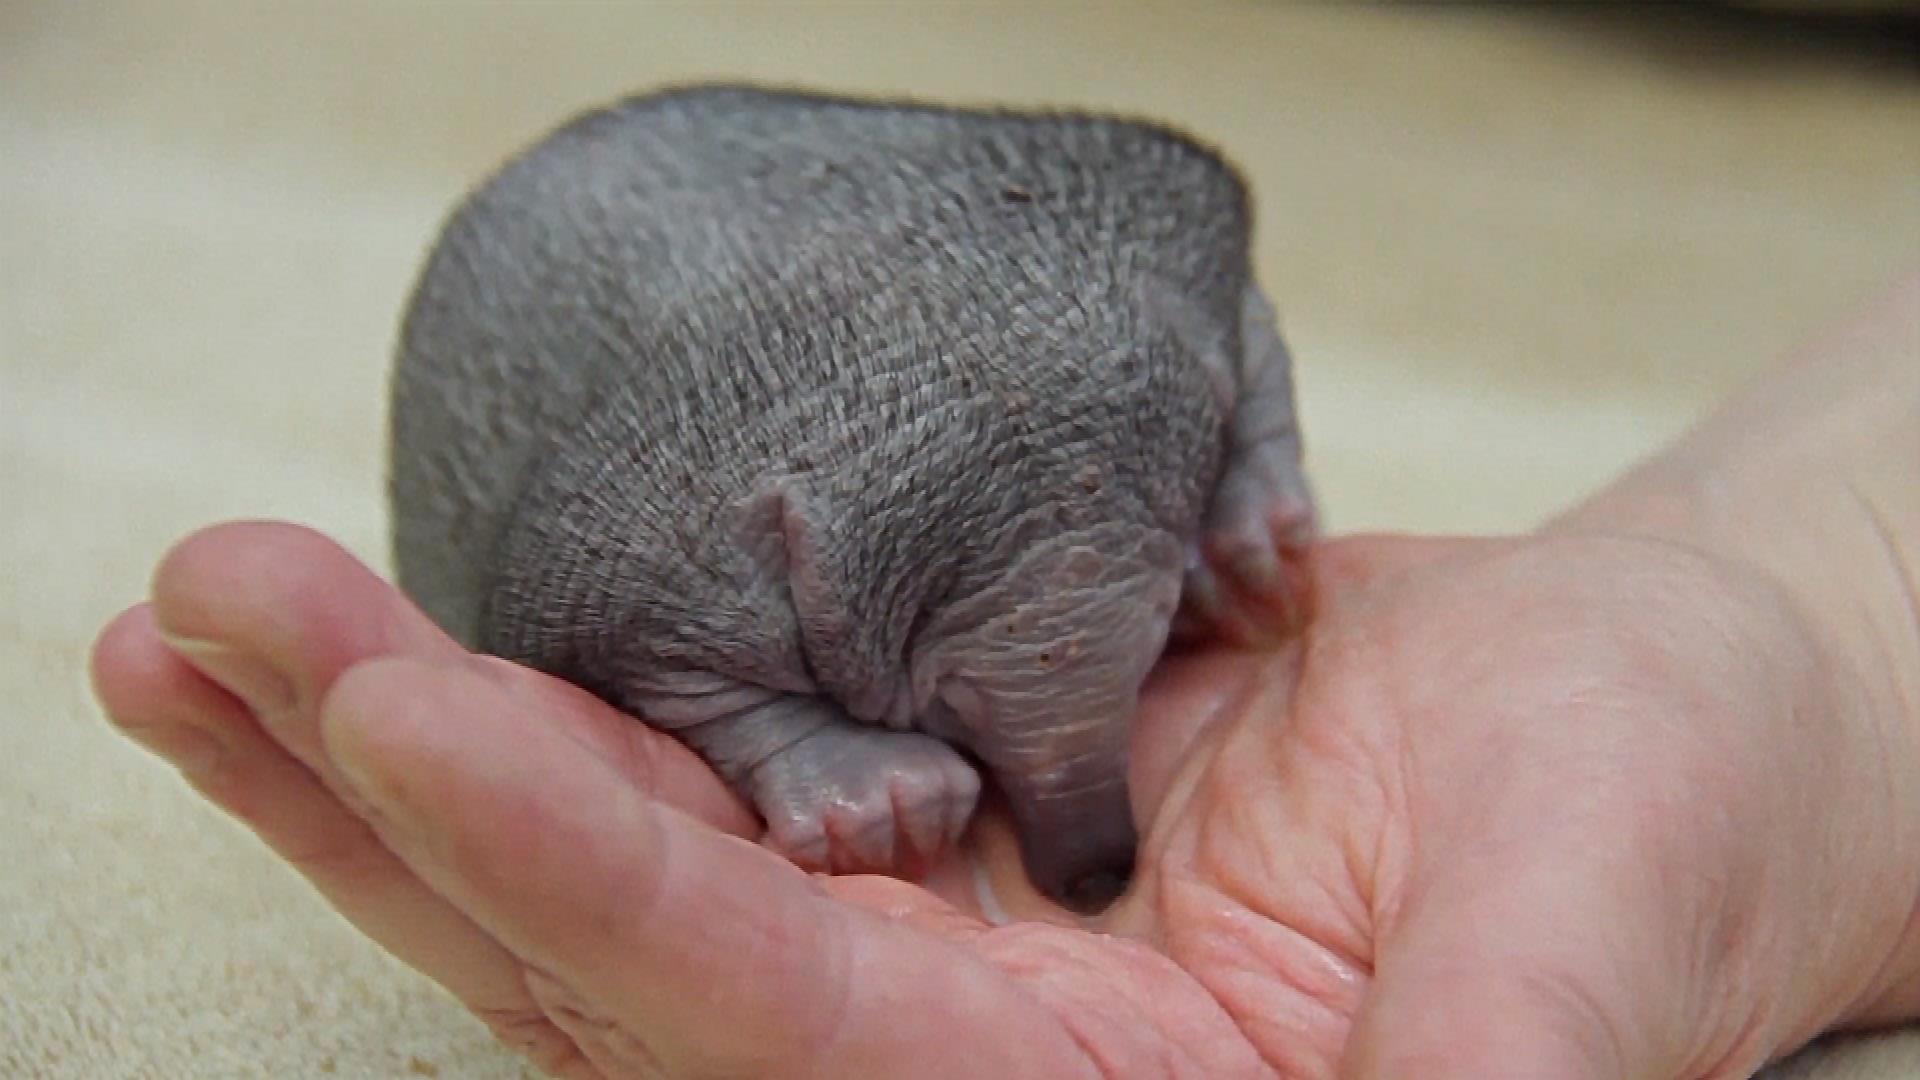 Baby echidna hospitalized after suspected bird attack